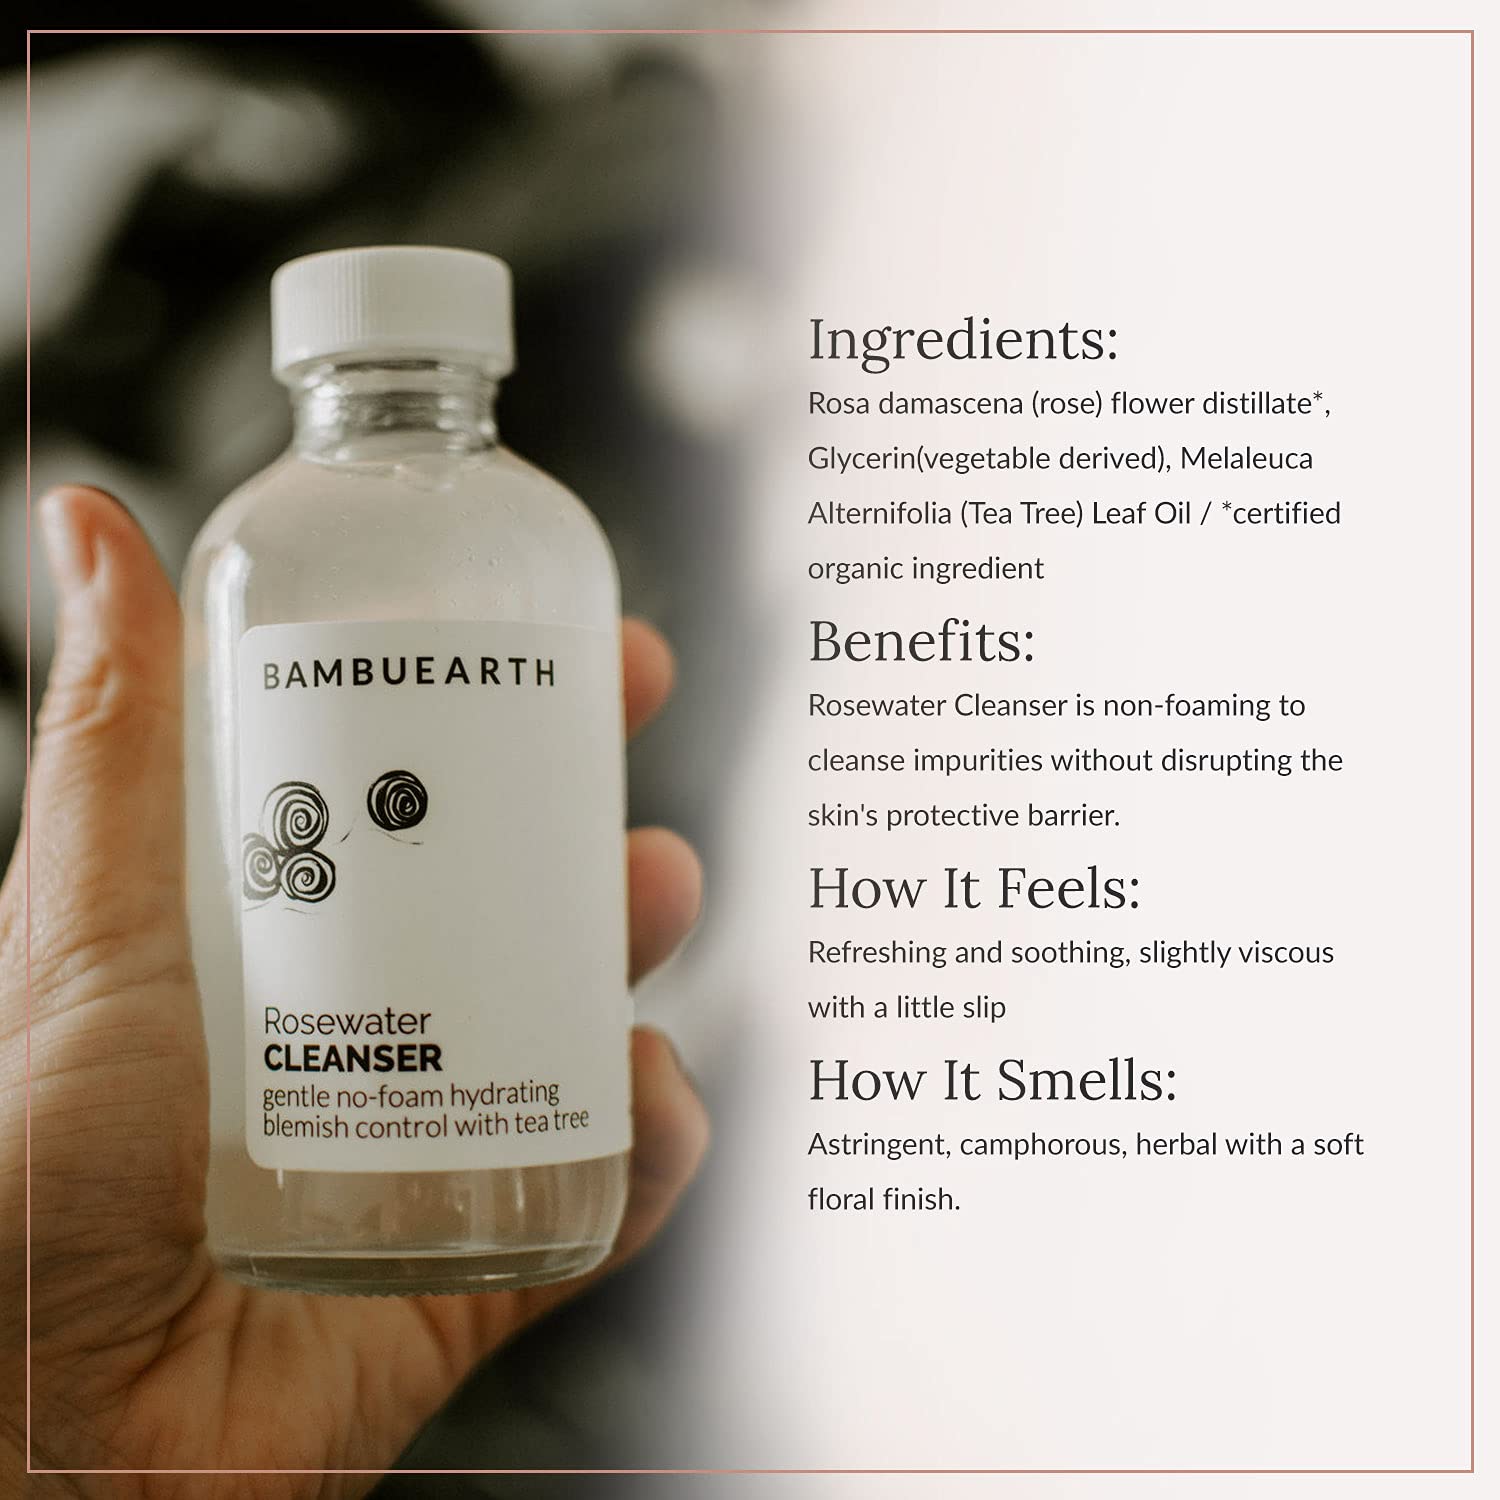 BambuEarth Rosewater Vegan Cleanser with Organic Ingredients - Helps Hydrate, Balance  Soothe - Non-Foaming Cleanser with Rosewater to Support Skins Barrier - Alcohol-Free Cleanser